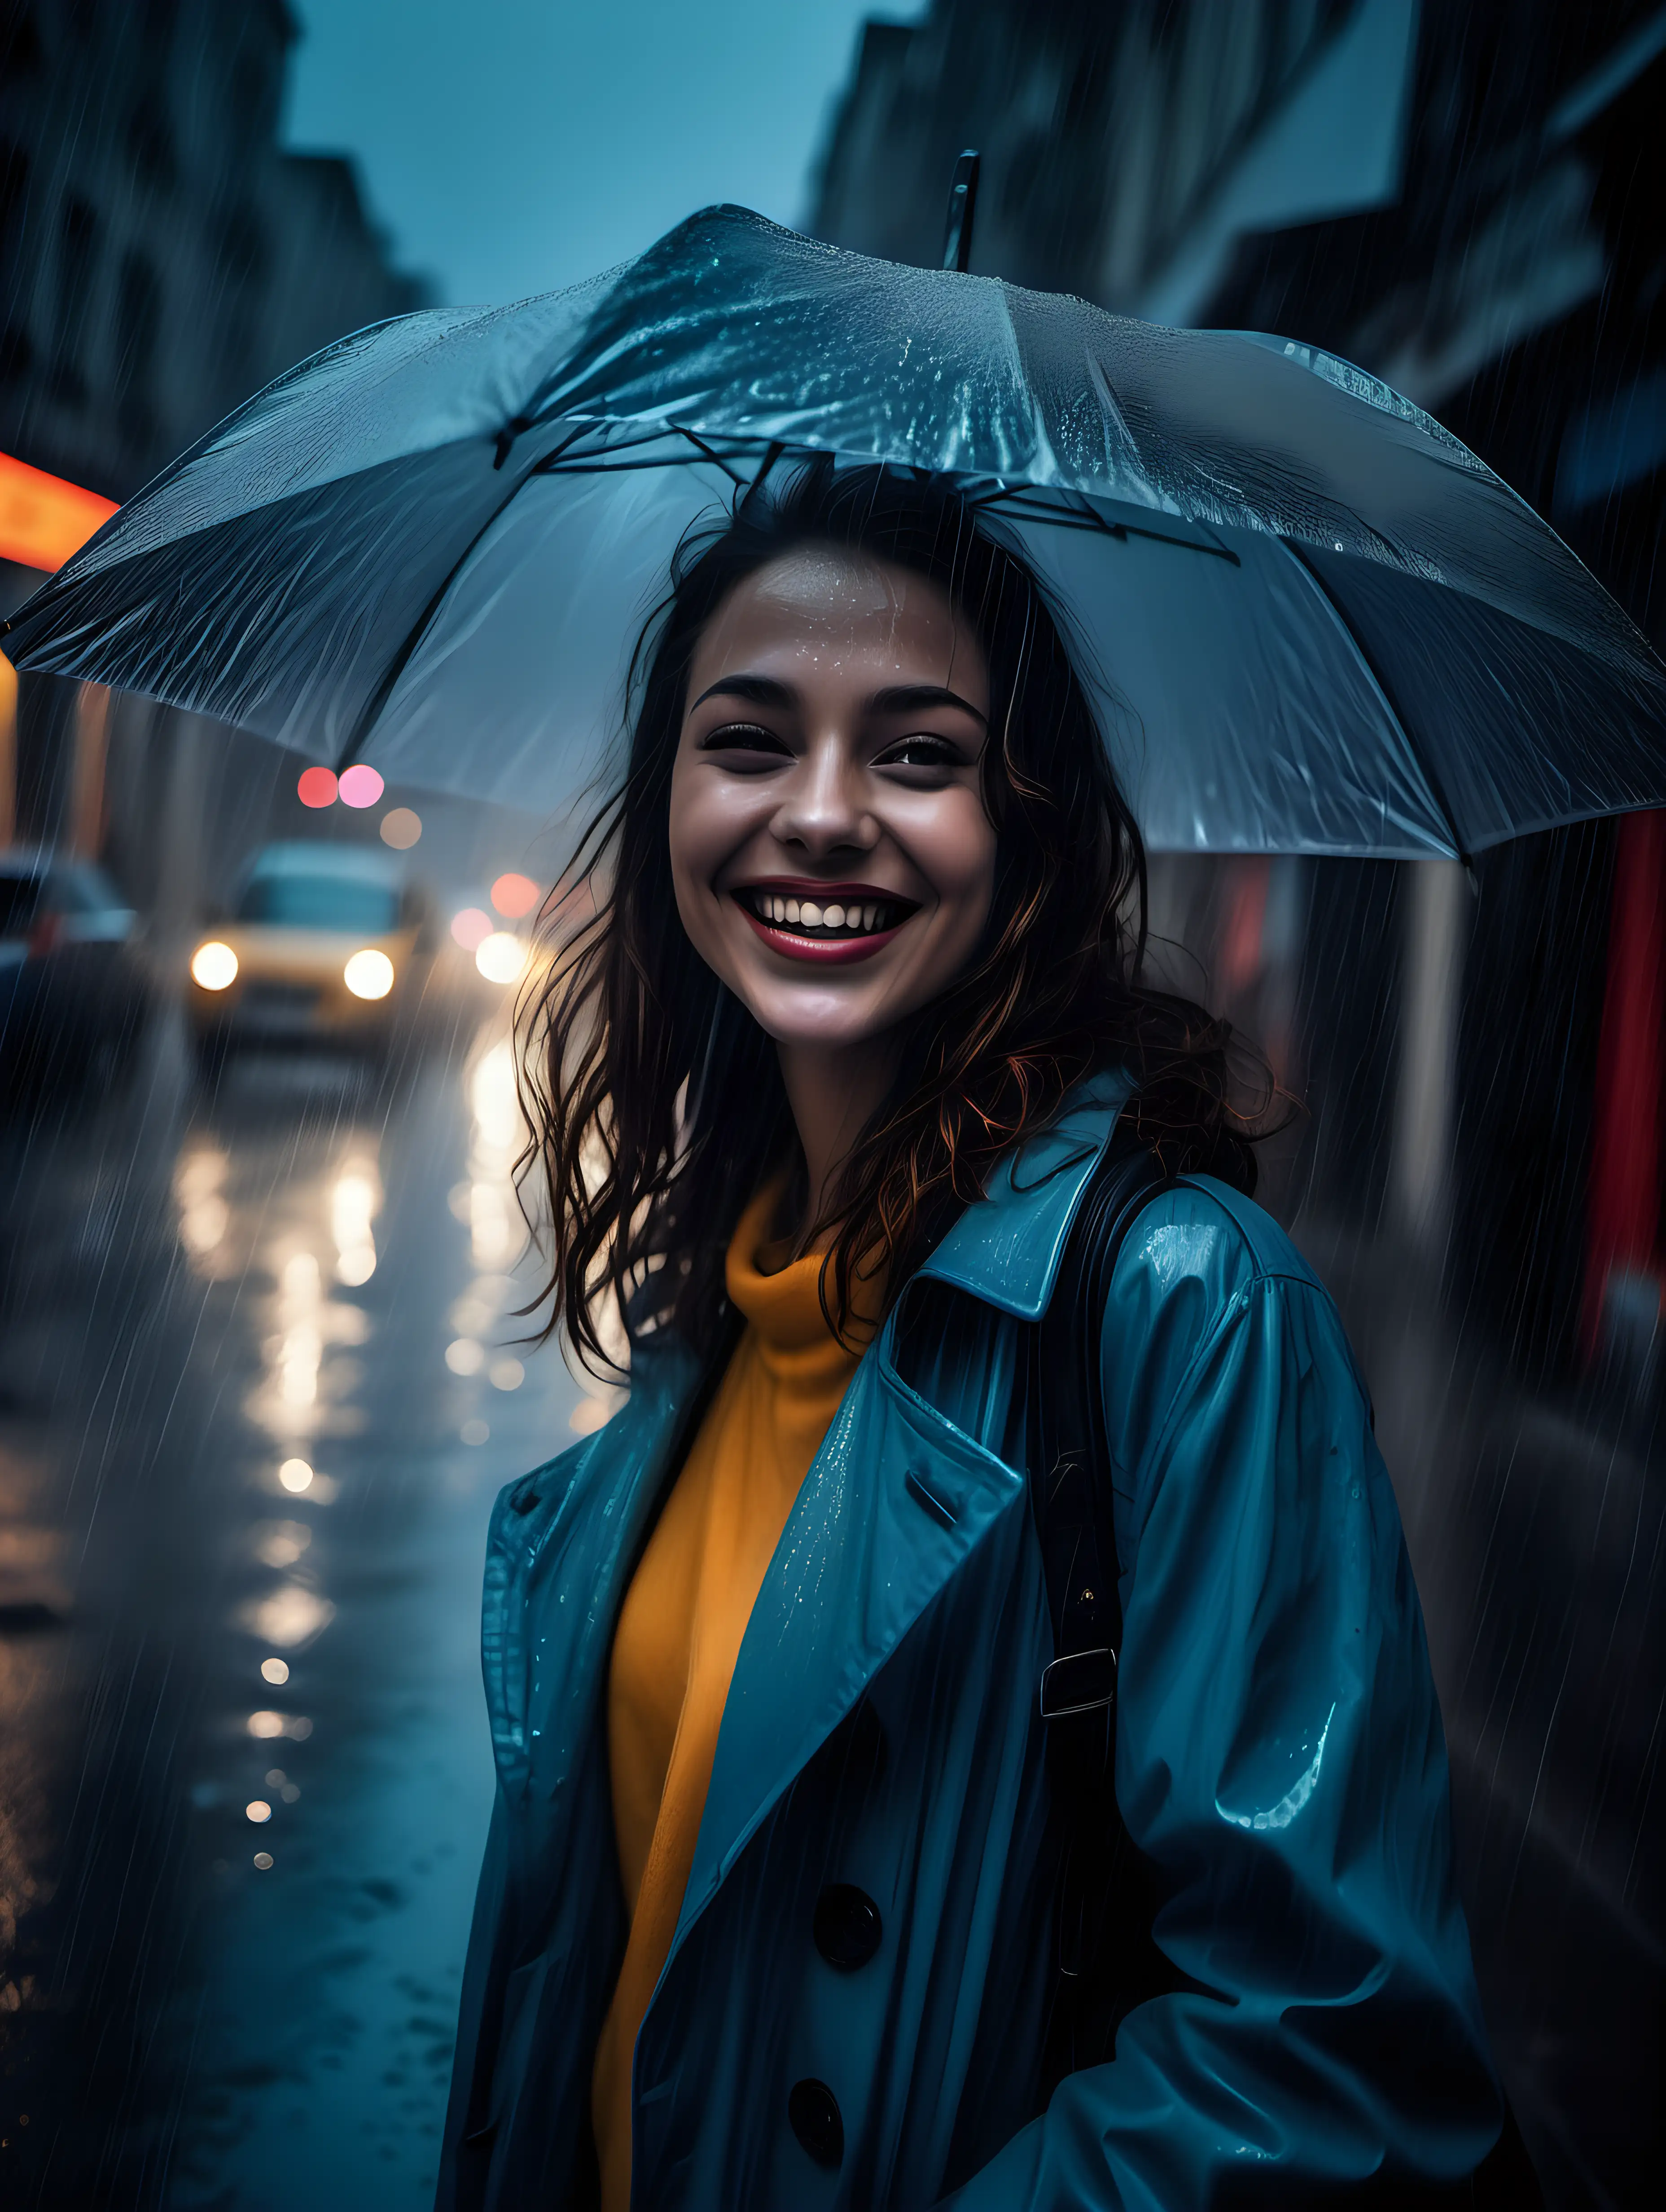 Woman cinematic contrast. Make her smile and make the background blurry, city raining colourful lights